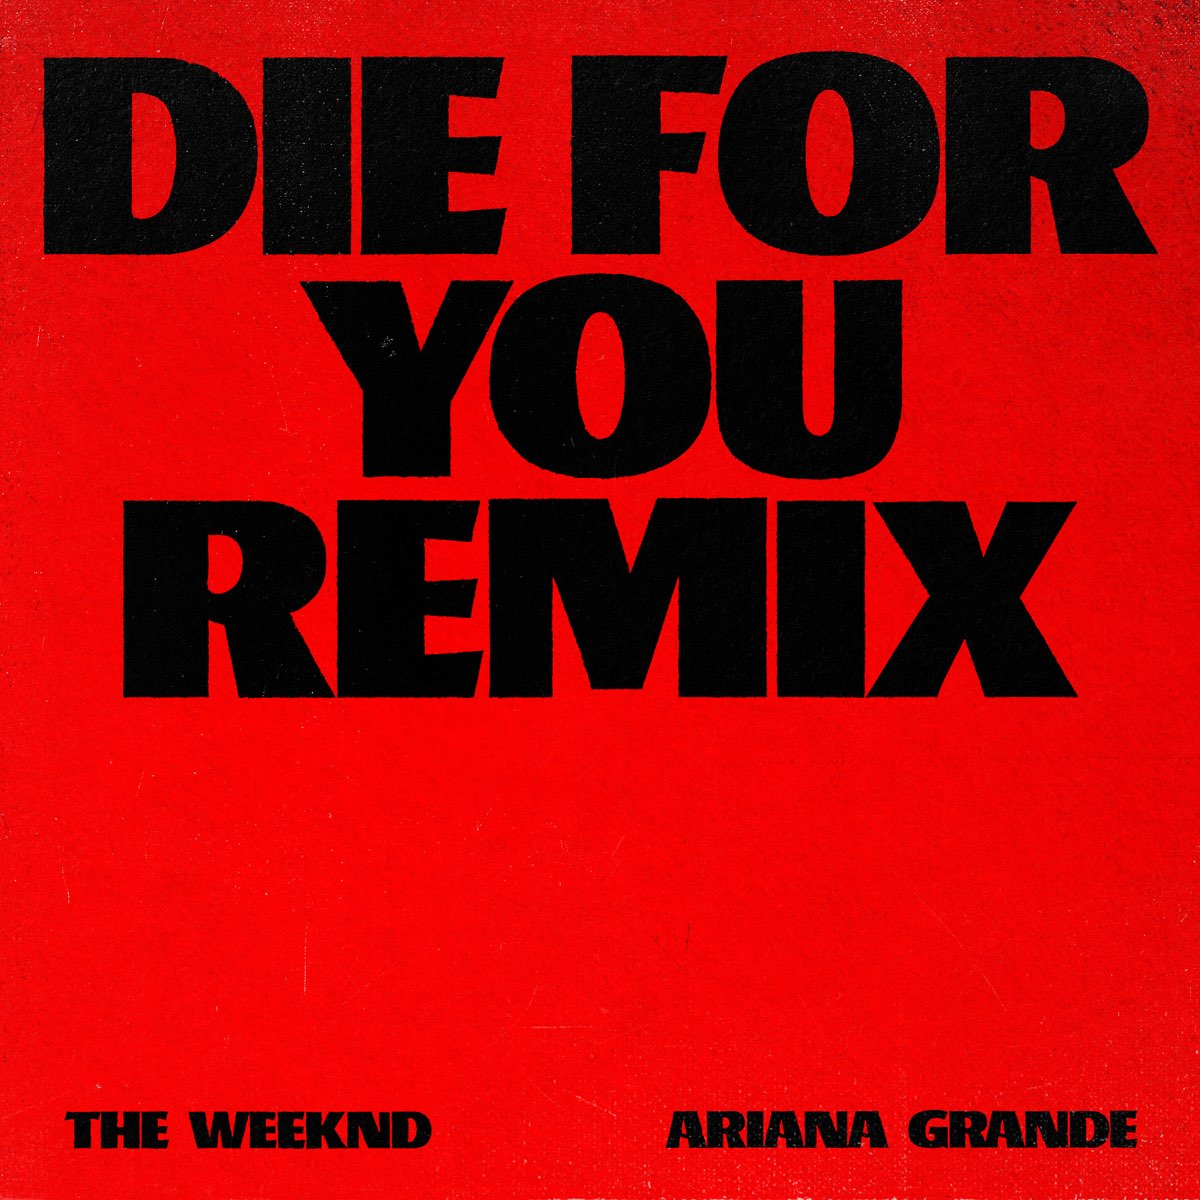 ‎Die For You (Remix) - Single by The Weeknd & Ariana Grande on Apple Music